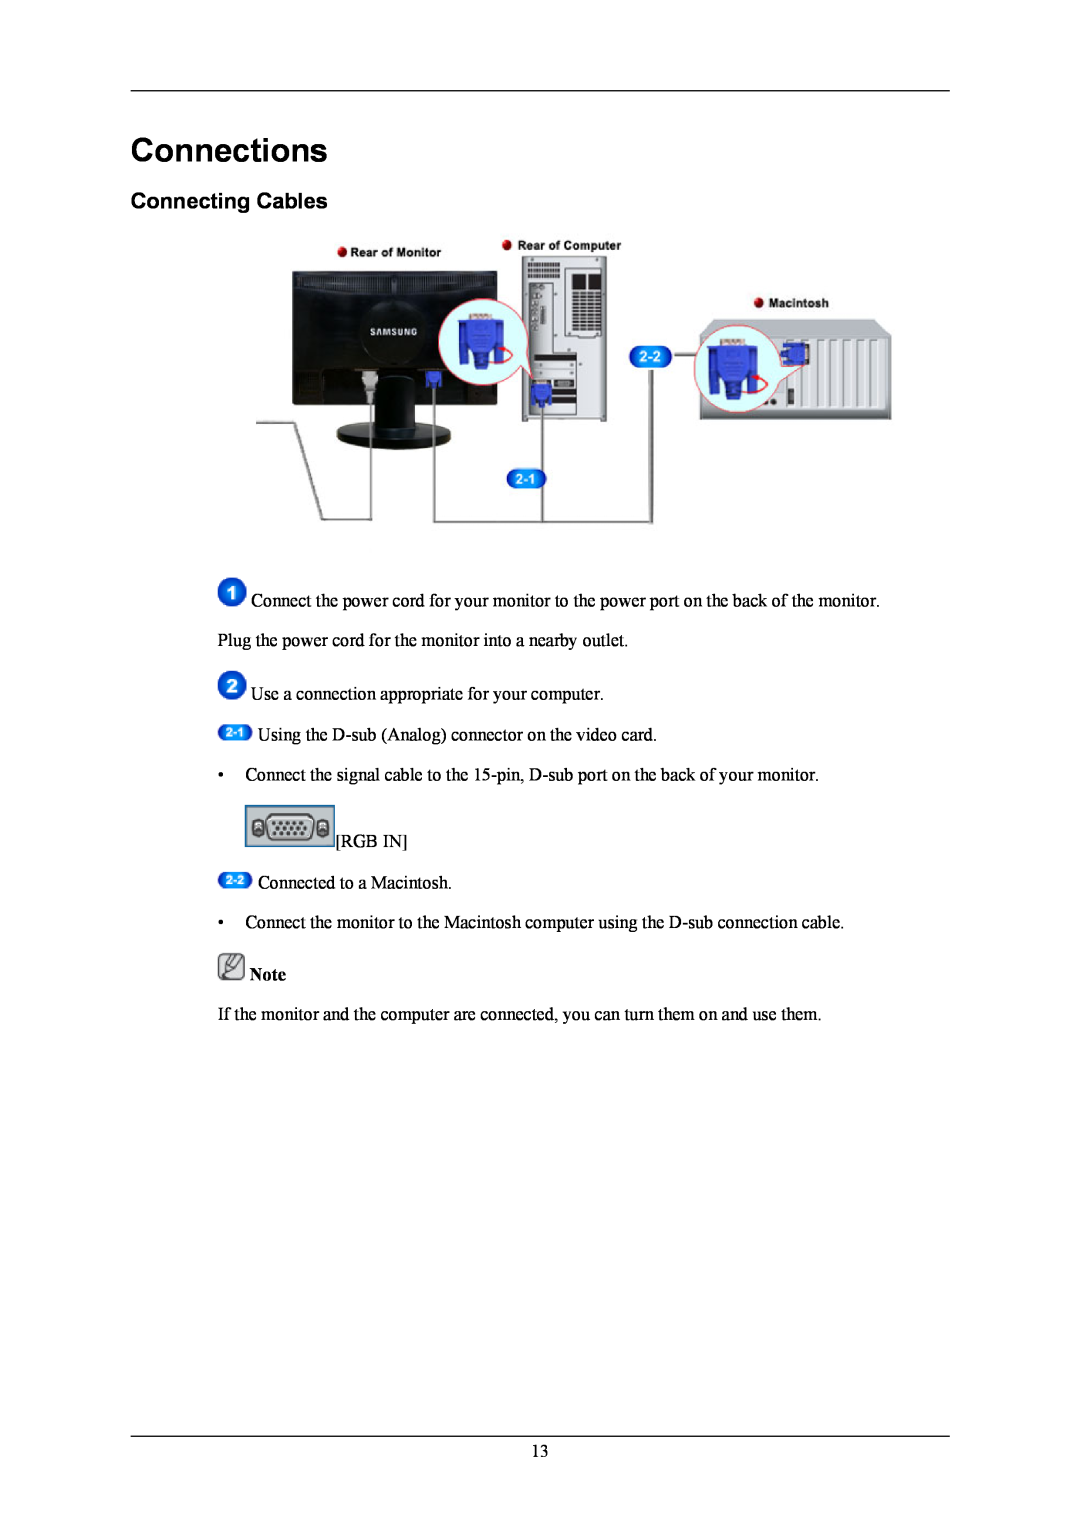 Samsung 2043NWX user manual Connections, Connecting Cables 